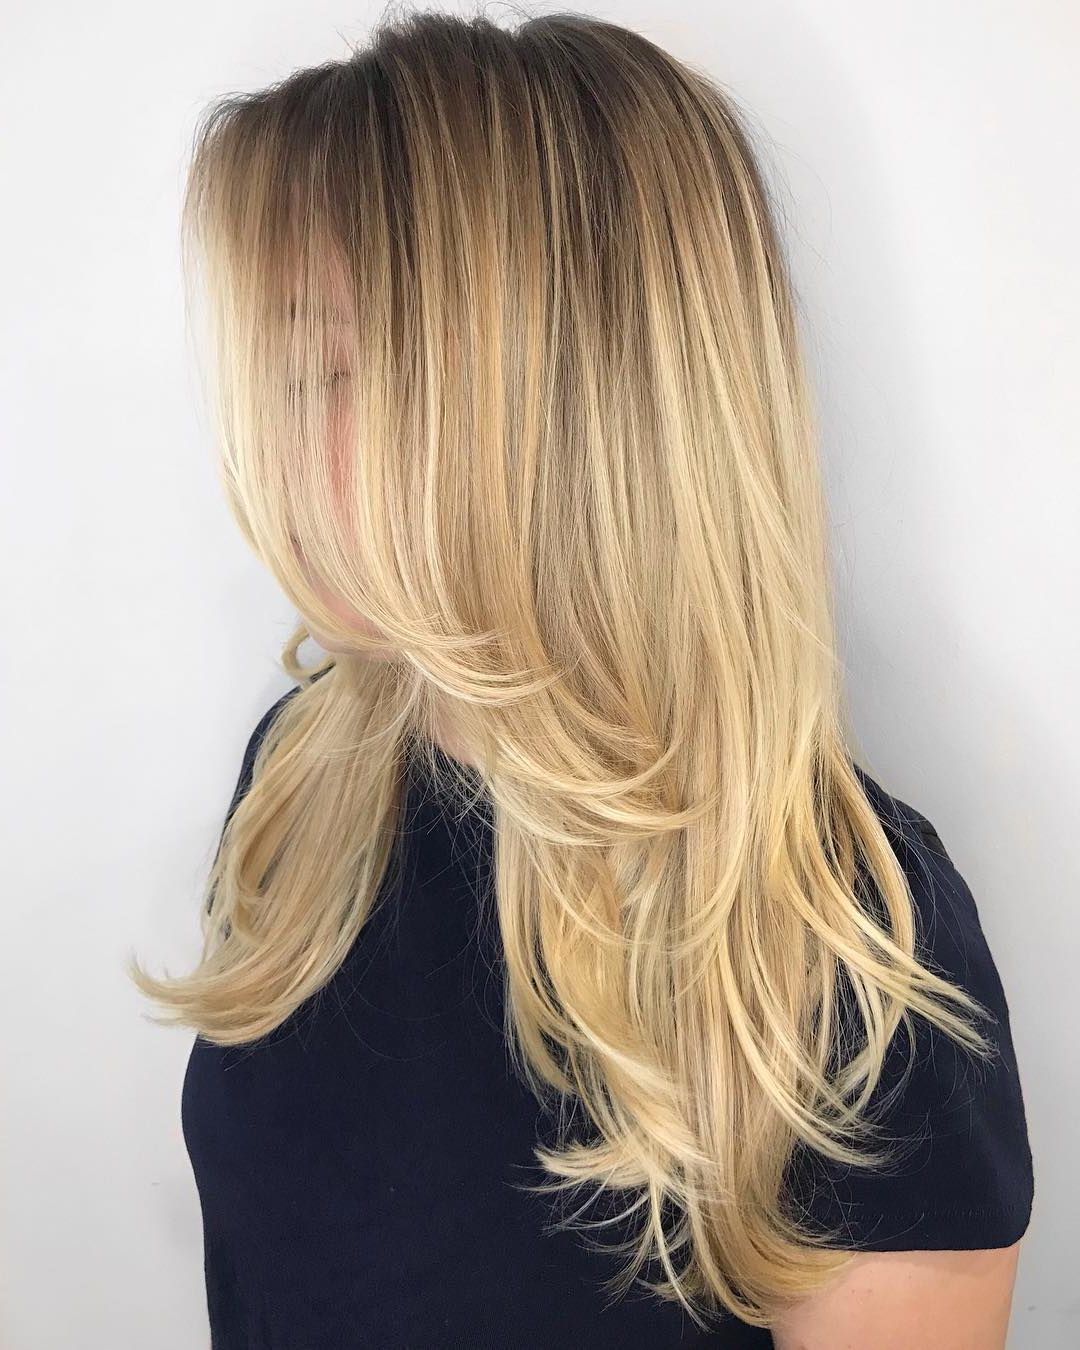 How To Nail Layered Hair In 2019: Full Guide To Lengths And Throughout Layered Haircuts With Delicate Feathers (View 11 of 20)